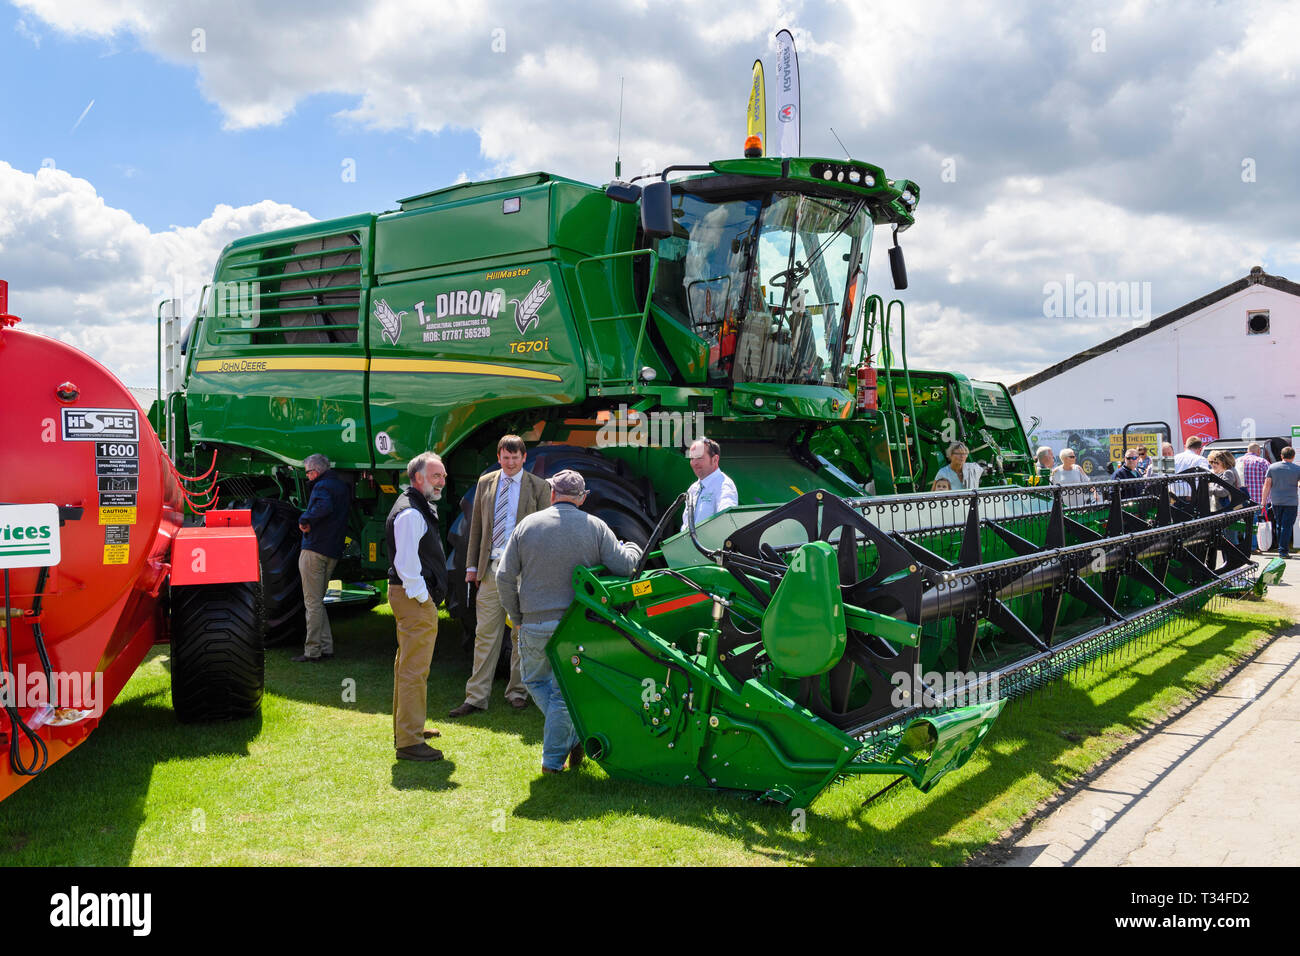 People standing & looking at agricultural machinery (green combine harvester) by trade stand display - Great Yorkshire Show, Harrogate, England, UK. Stock Photo